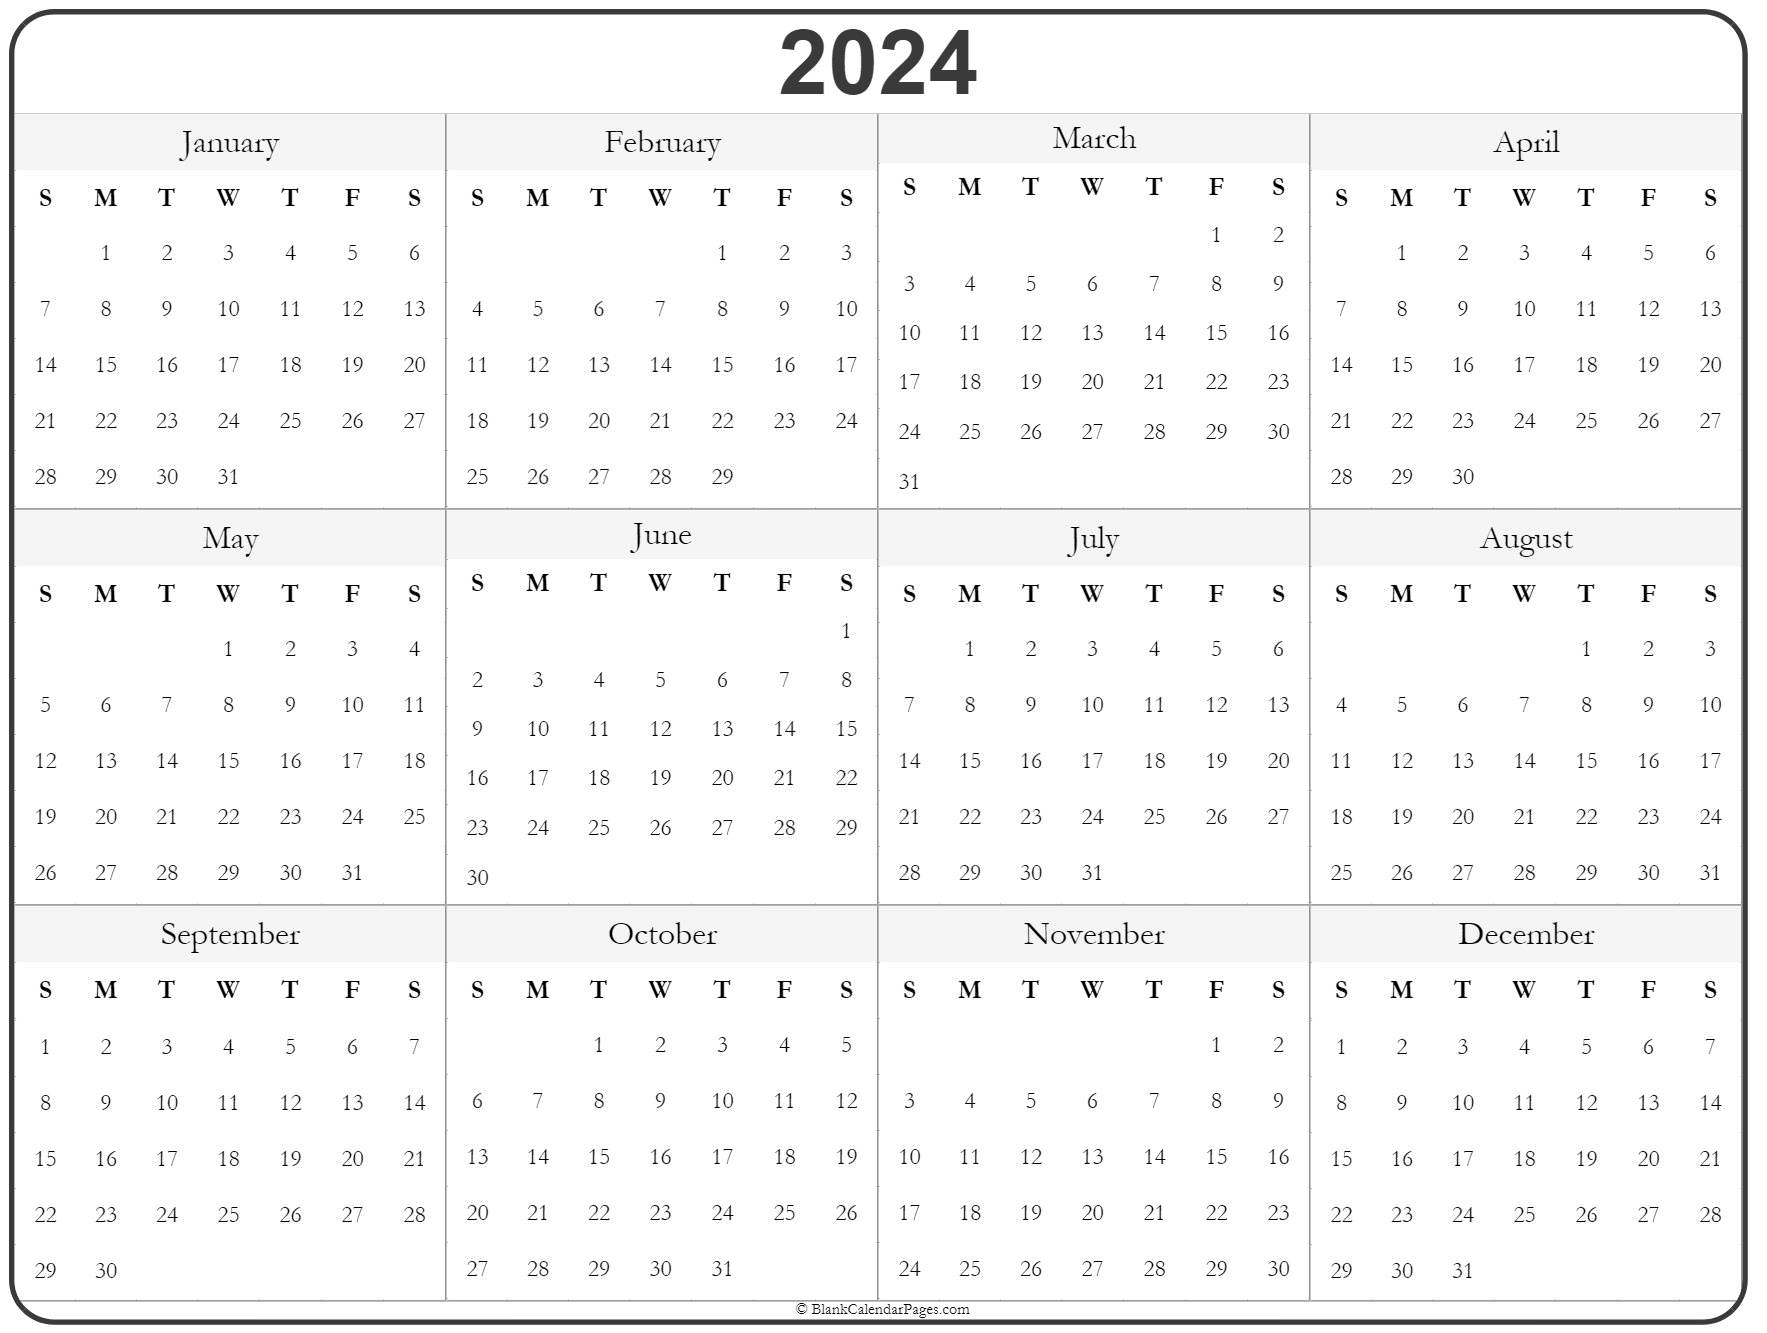 Yearly Calendar 2024 Calendar Quickly 2024 Yearly Calendar - Free Printable 2024 Yearly Calendar On One Page